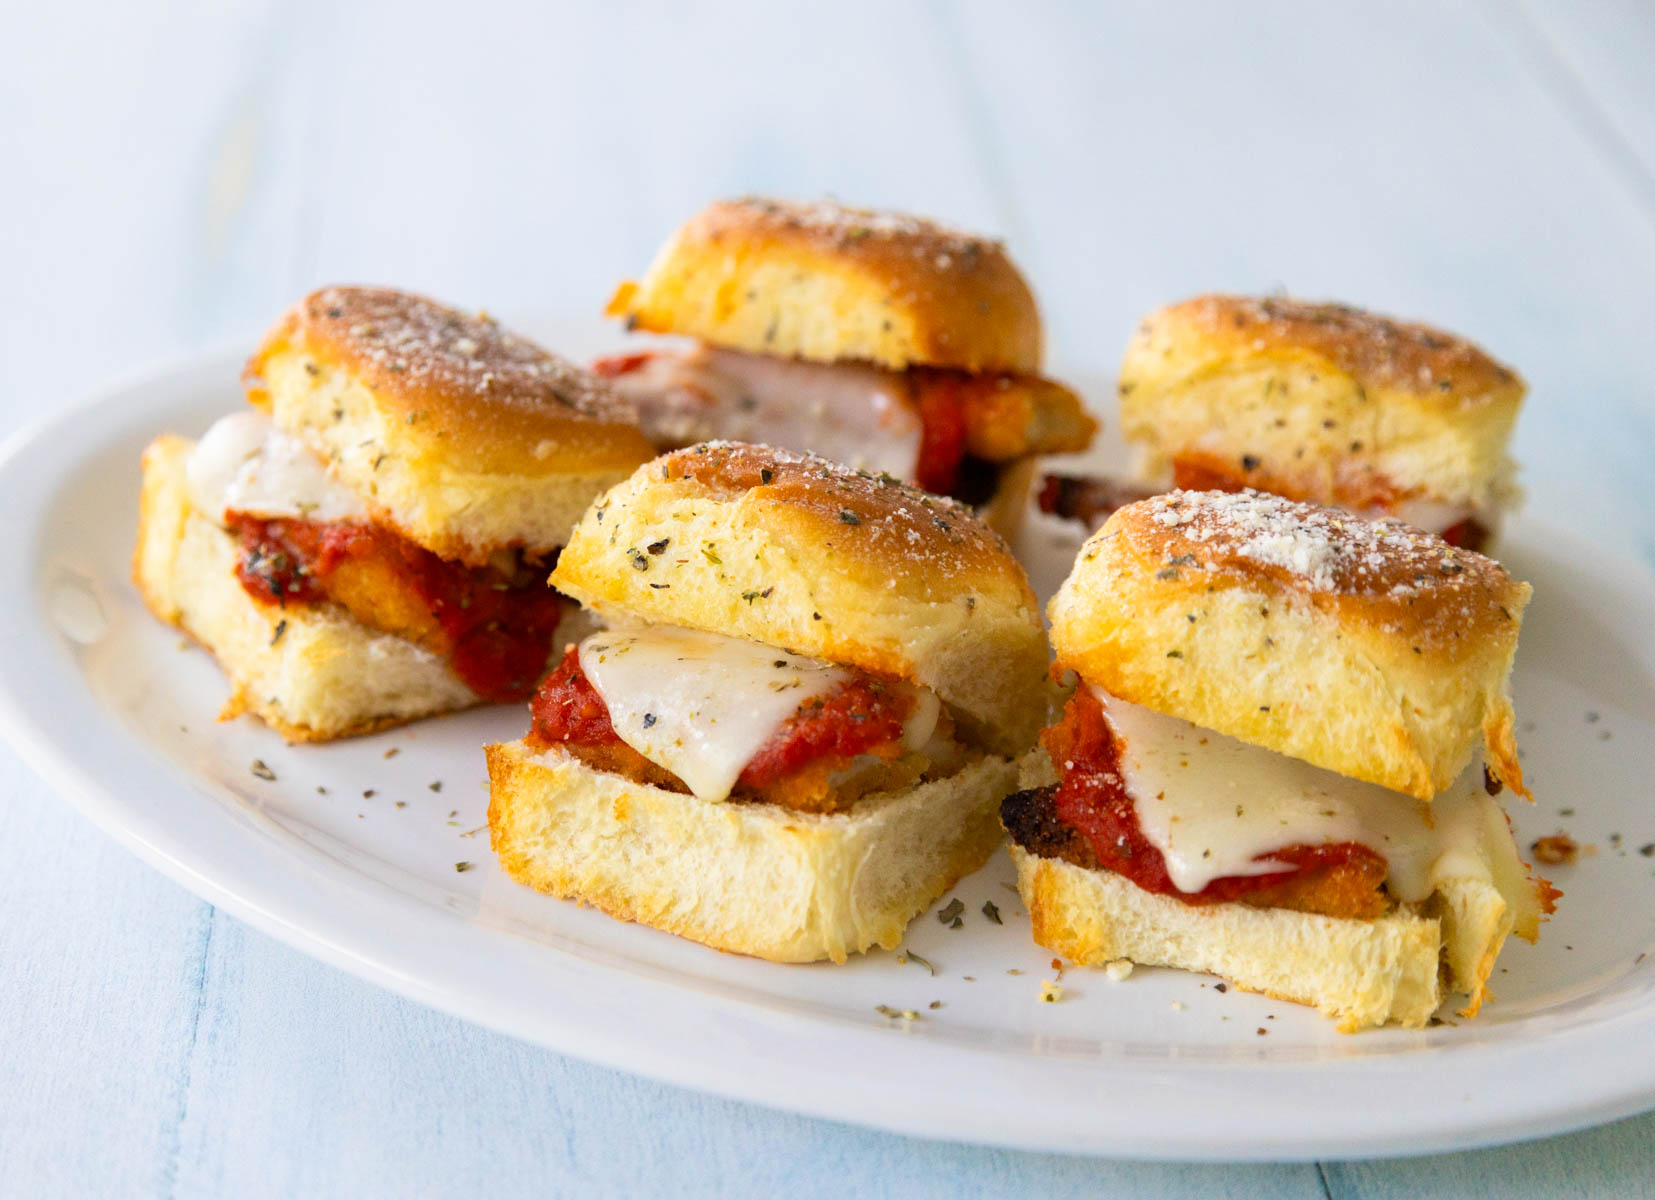 The platter of chicken parm sliders is ready to be served at the party.